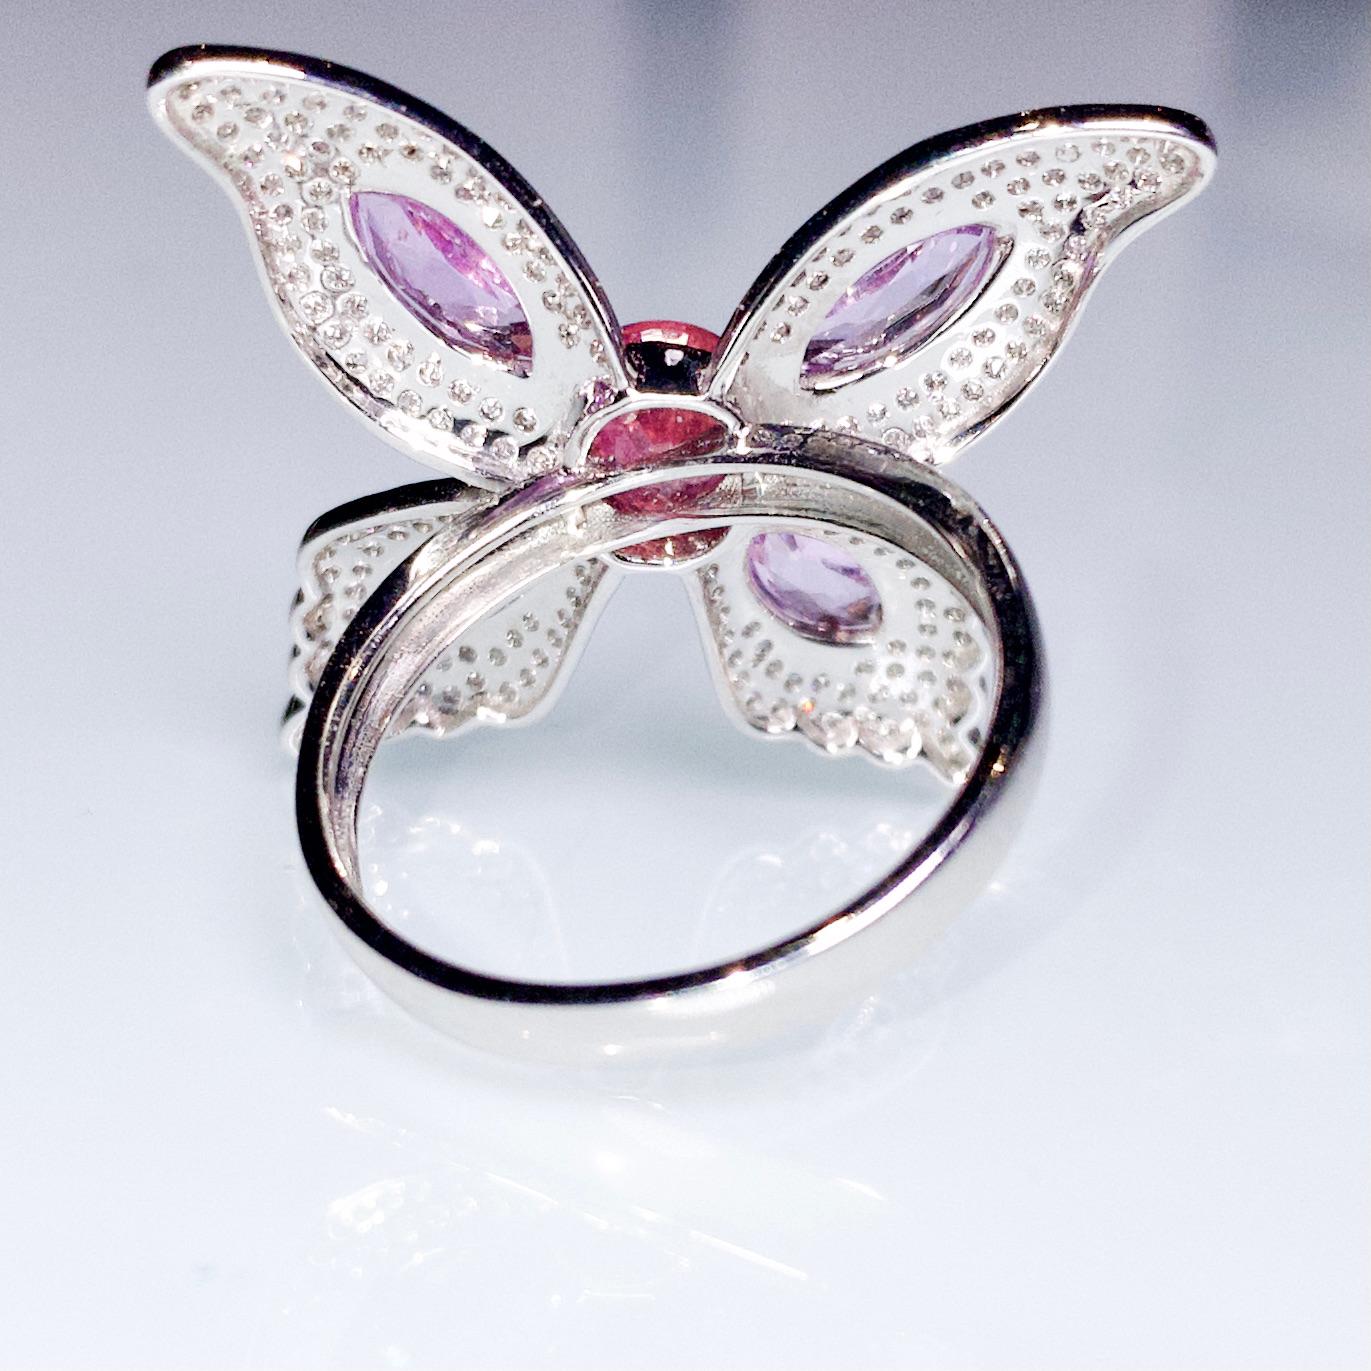 A Pink Sapphire and Diamond Ring in 18k White Gold
It consists of A Main 1.2 ct Pink Sapphire of Sri Lanka Origin, The colour is also known as 